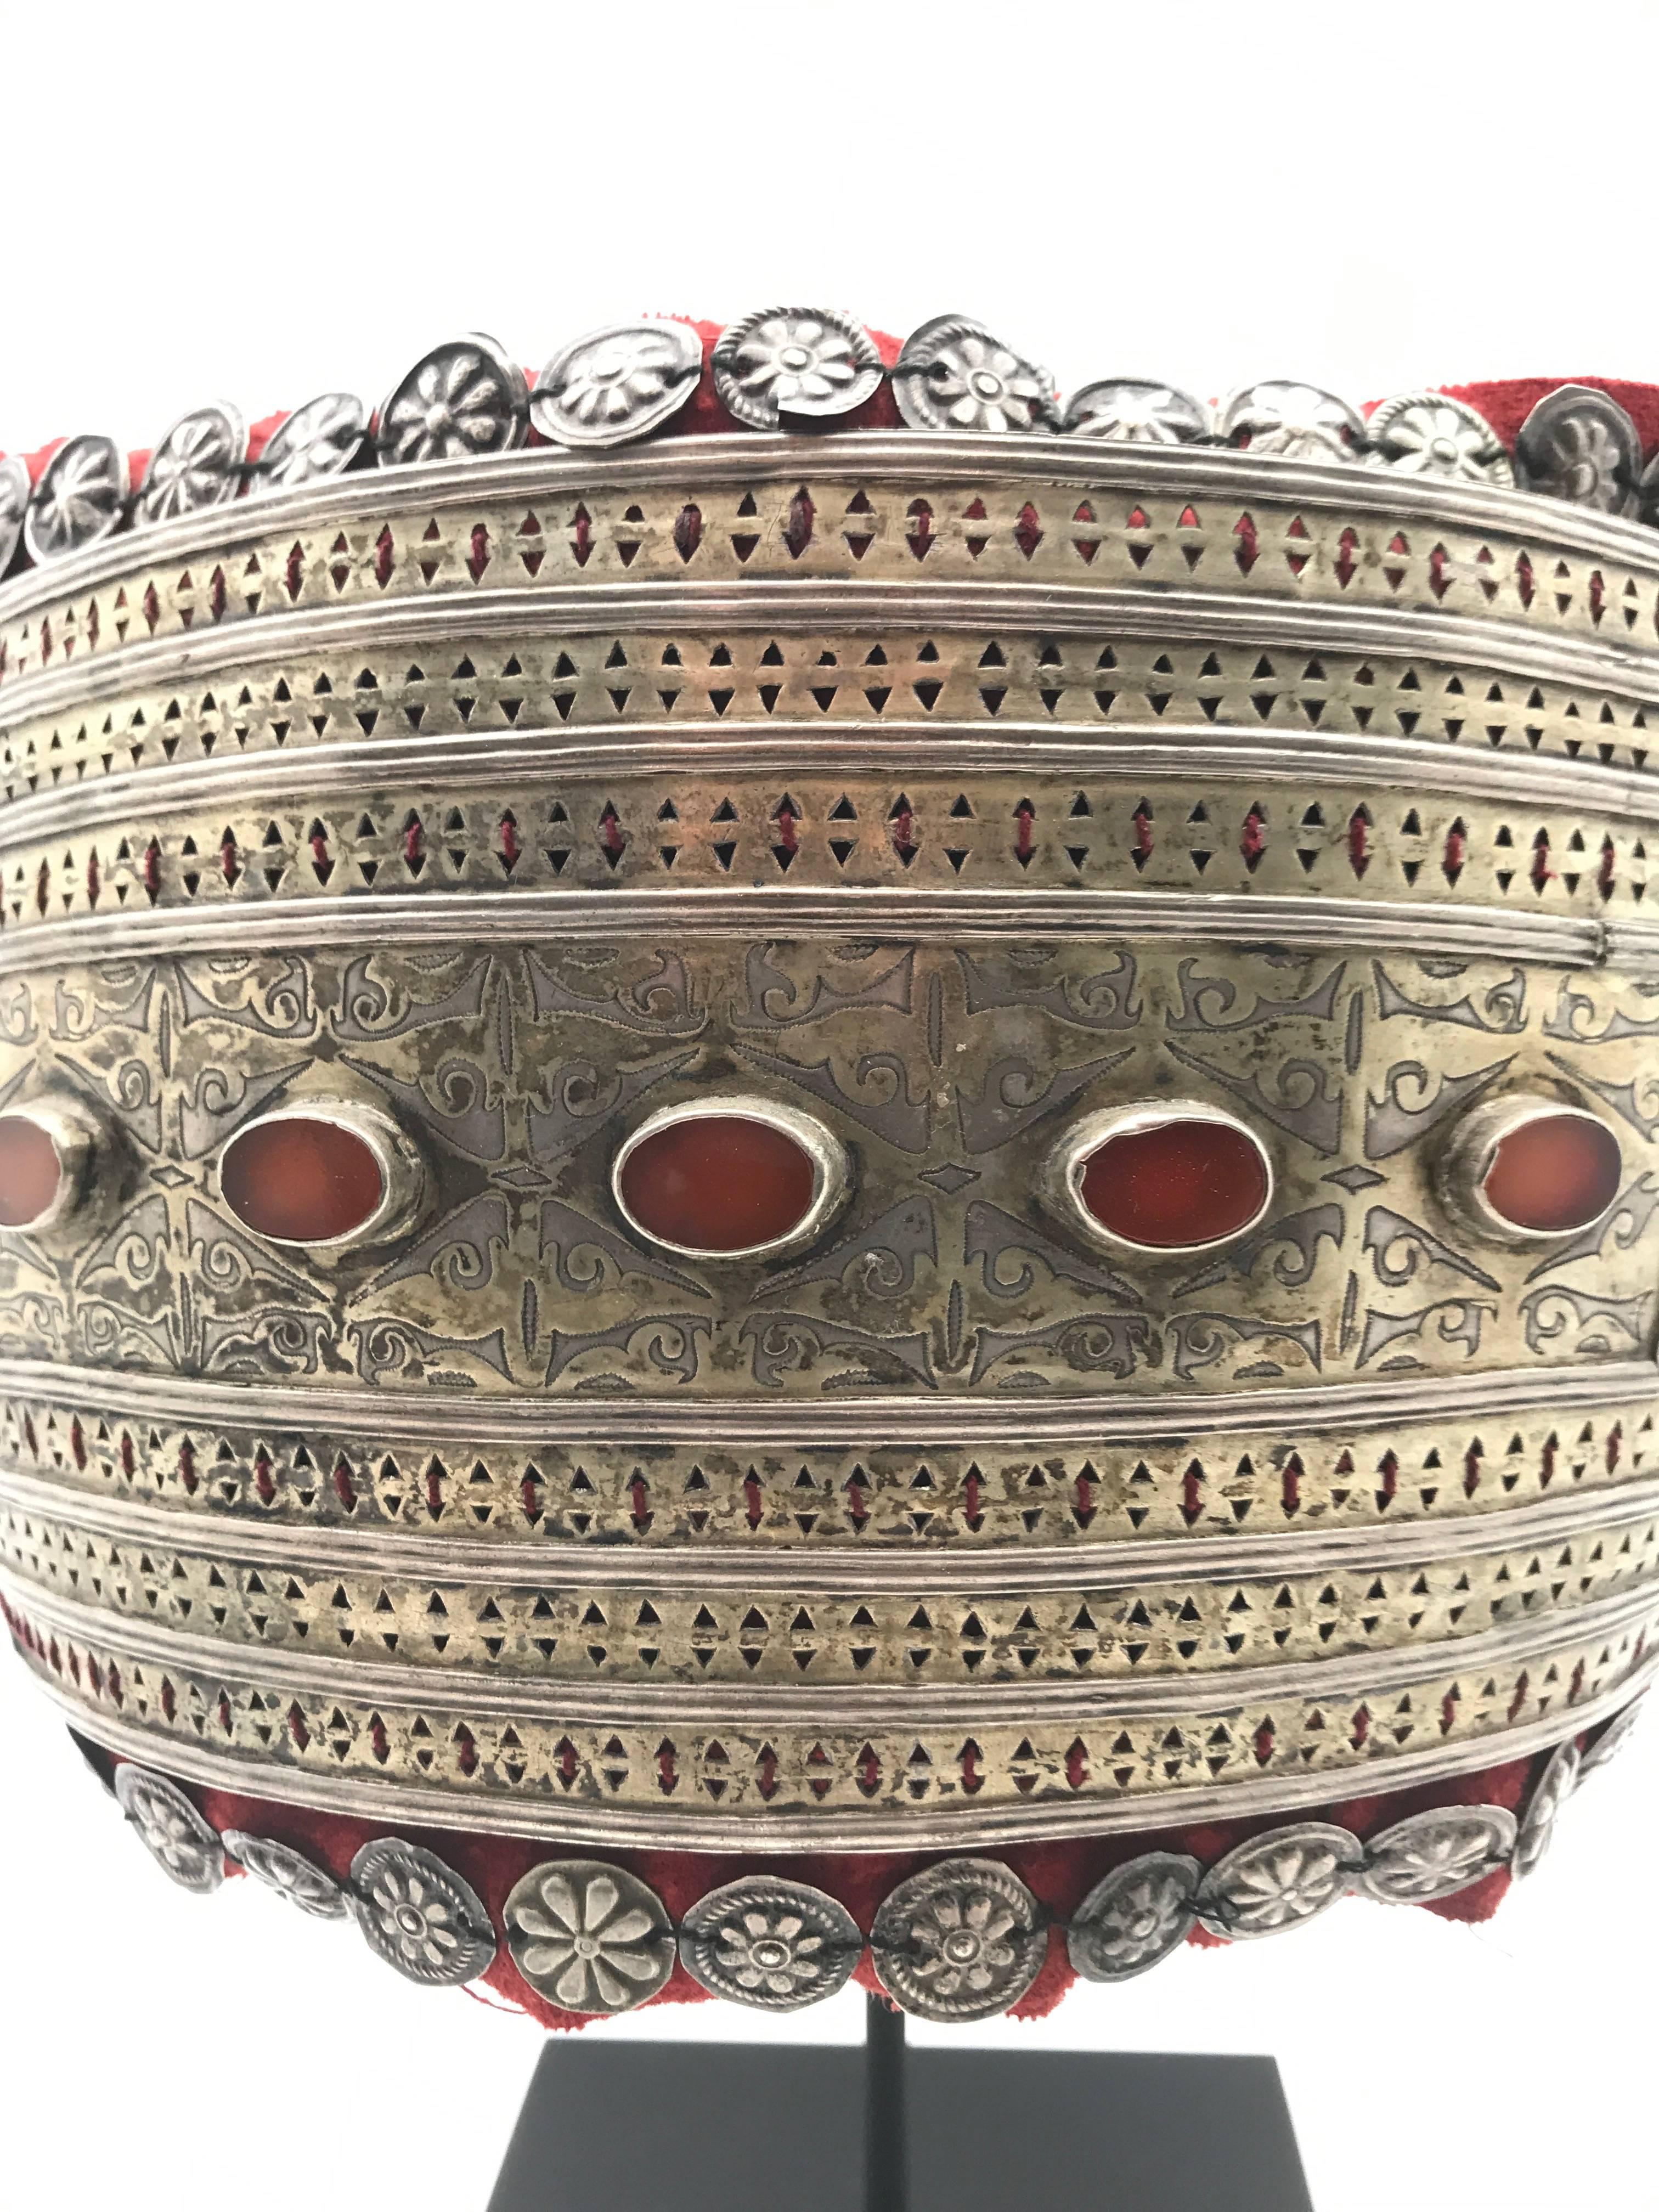 Beautifully mounted silver and carnelian headdress from Turkmenistan. This piece was worn as part of the traditional Turkmen woman's ceremonial outfit.